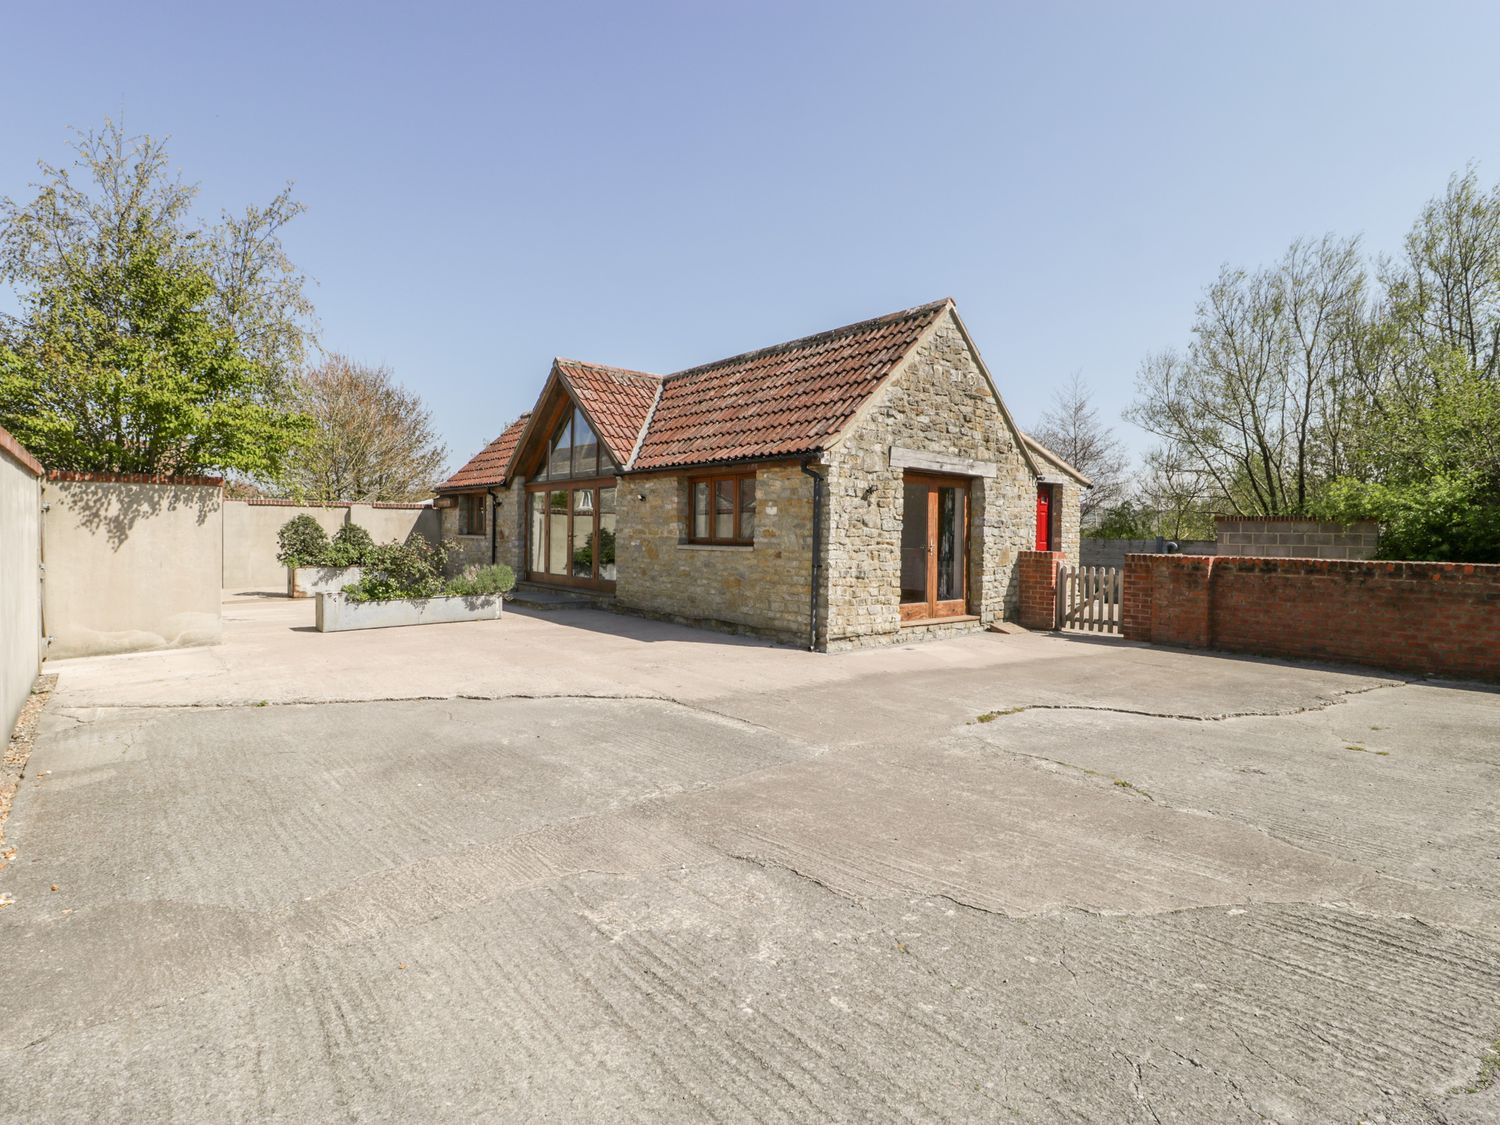 The Stone Barn - Somerset & Wiltshire - 951336 - photo 1